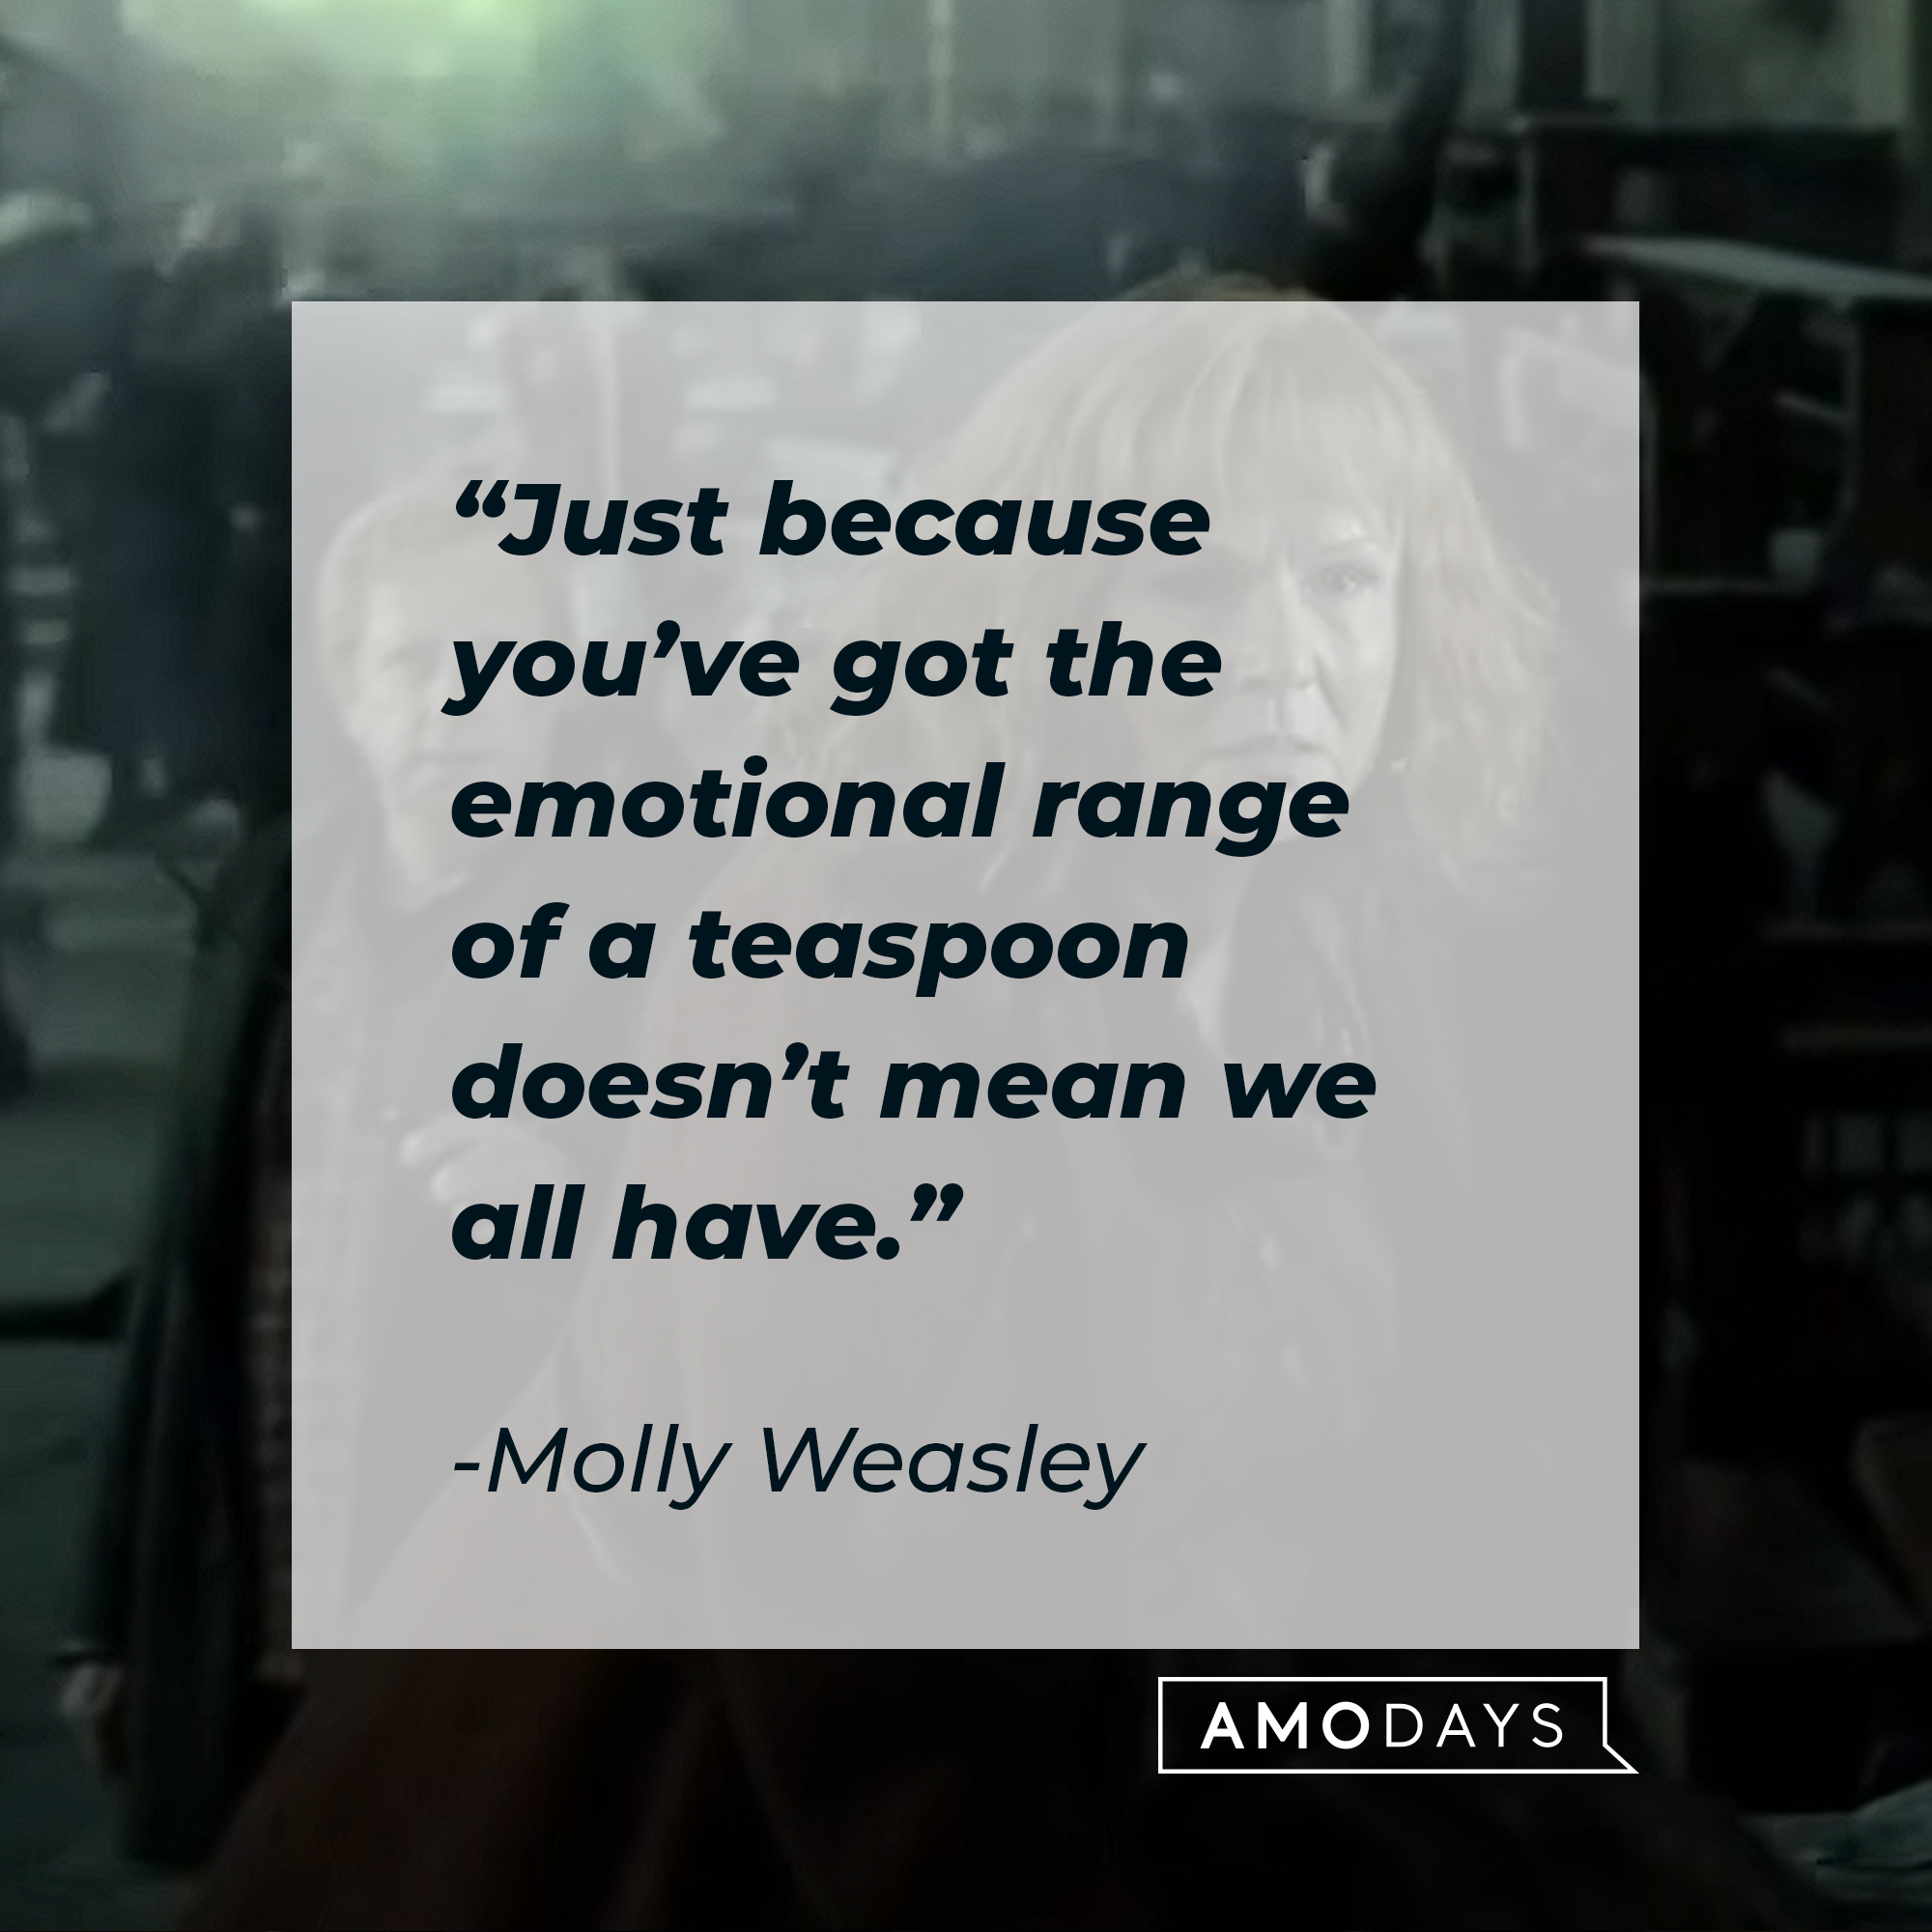 Molly Weasley's quote: "Just because you’ve got the emotional range of a teaspoon doesn’t mean we all have." | Source: Youtube.com/harrypotter